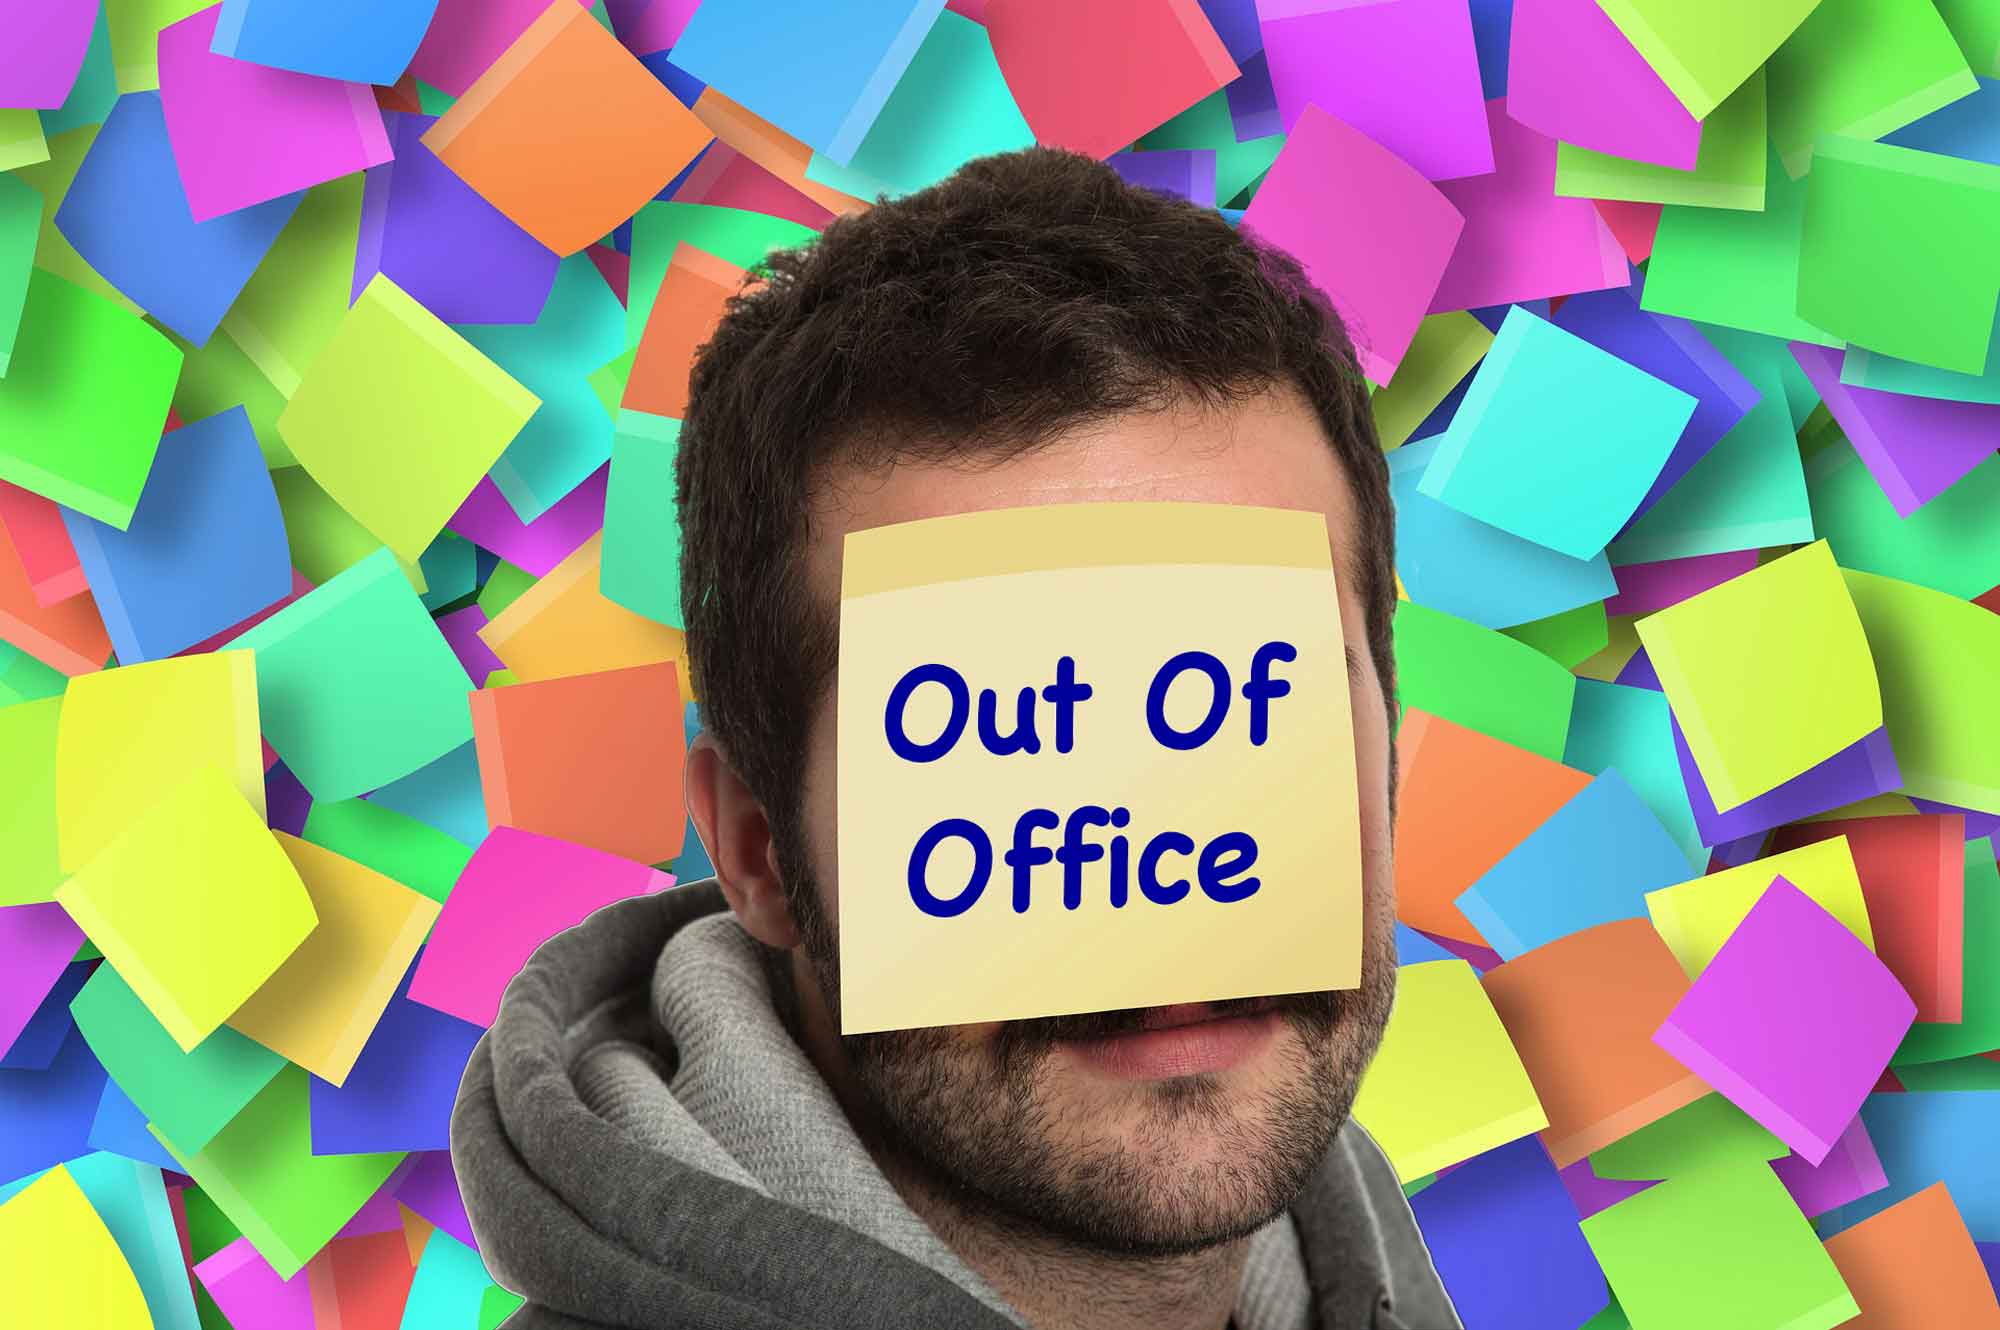 55 Funny Out Of Office Messages That Will Make Your Coworkers Smile